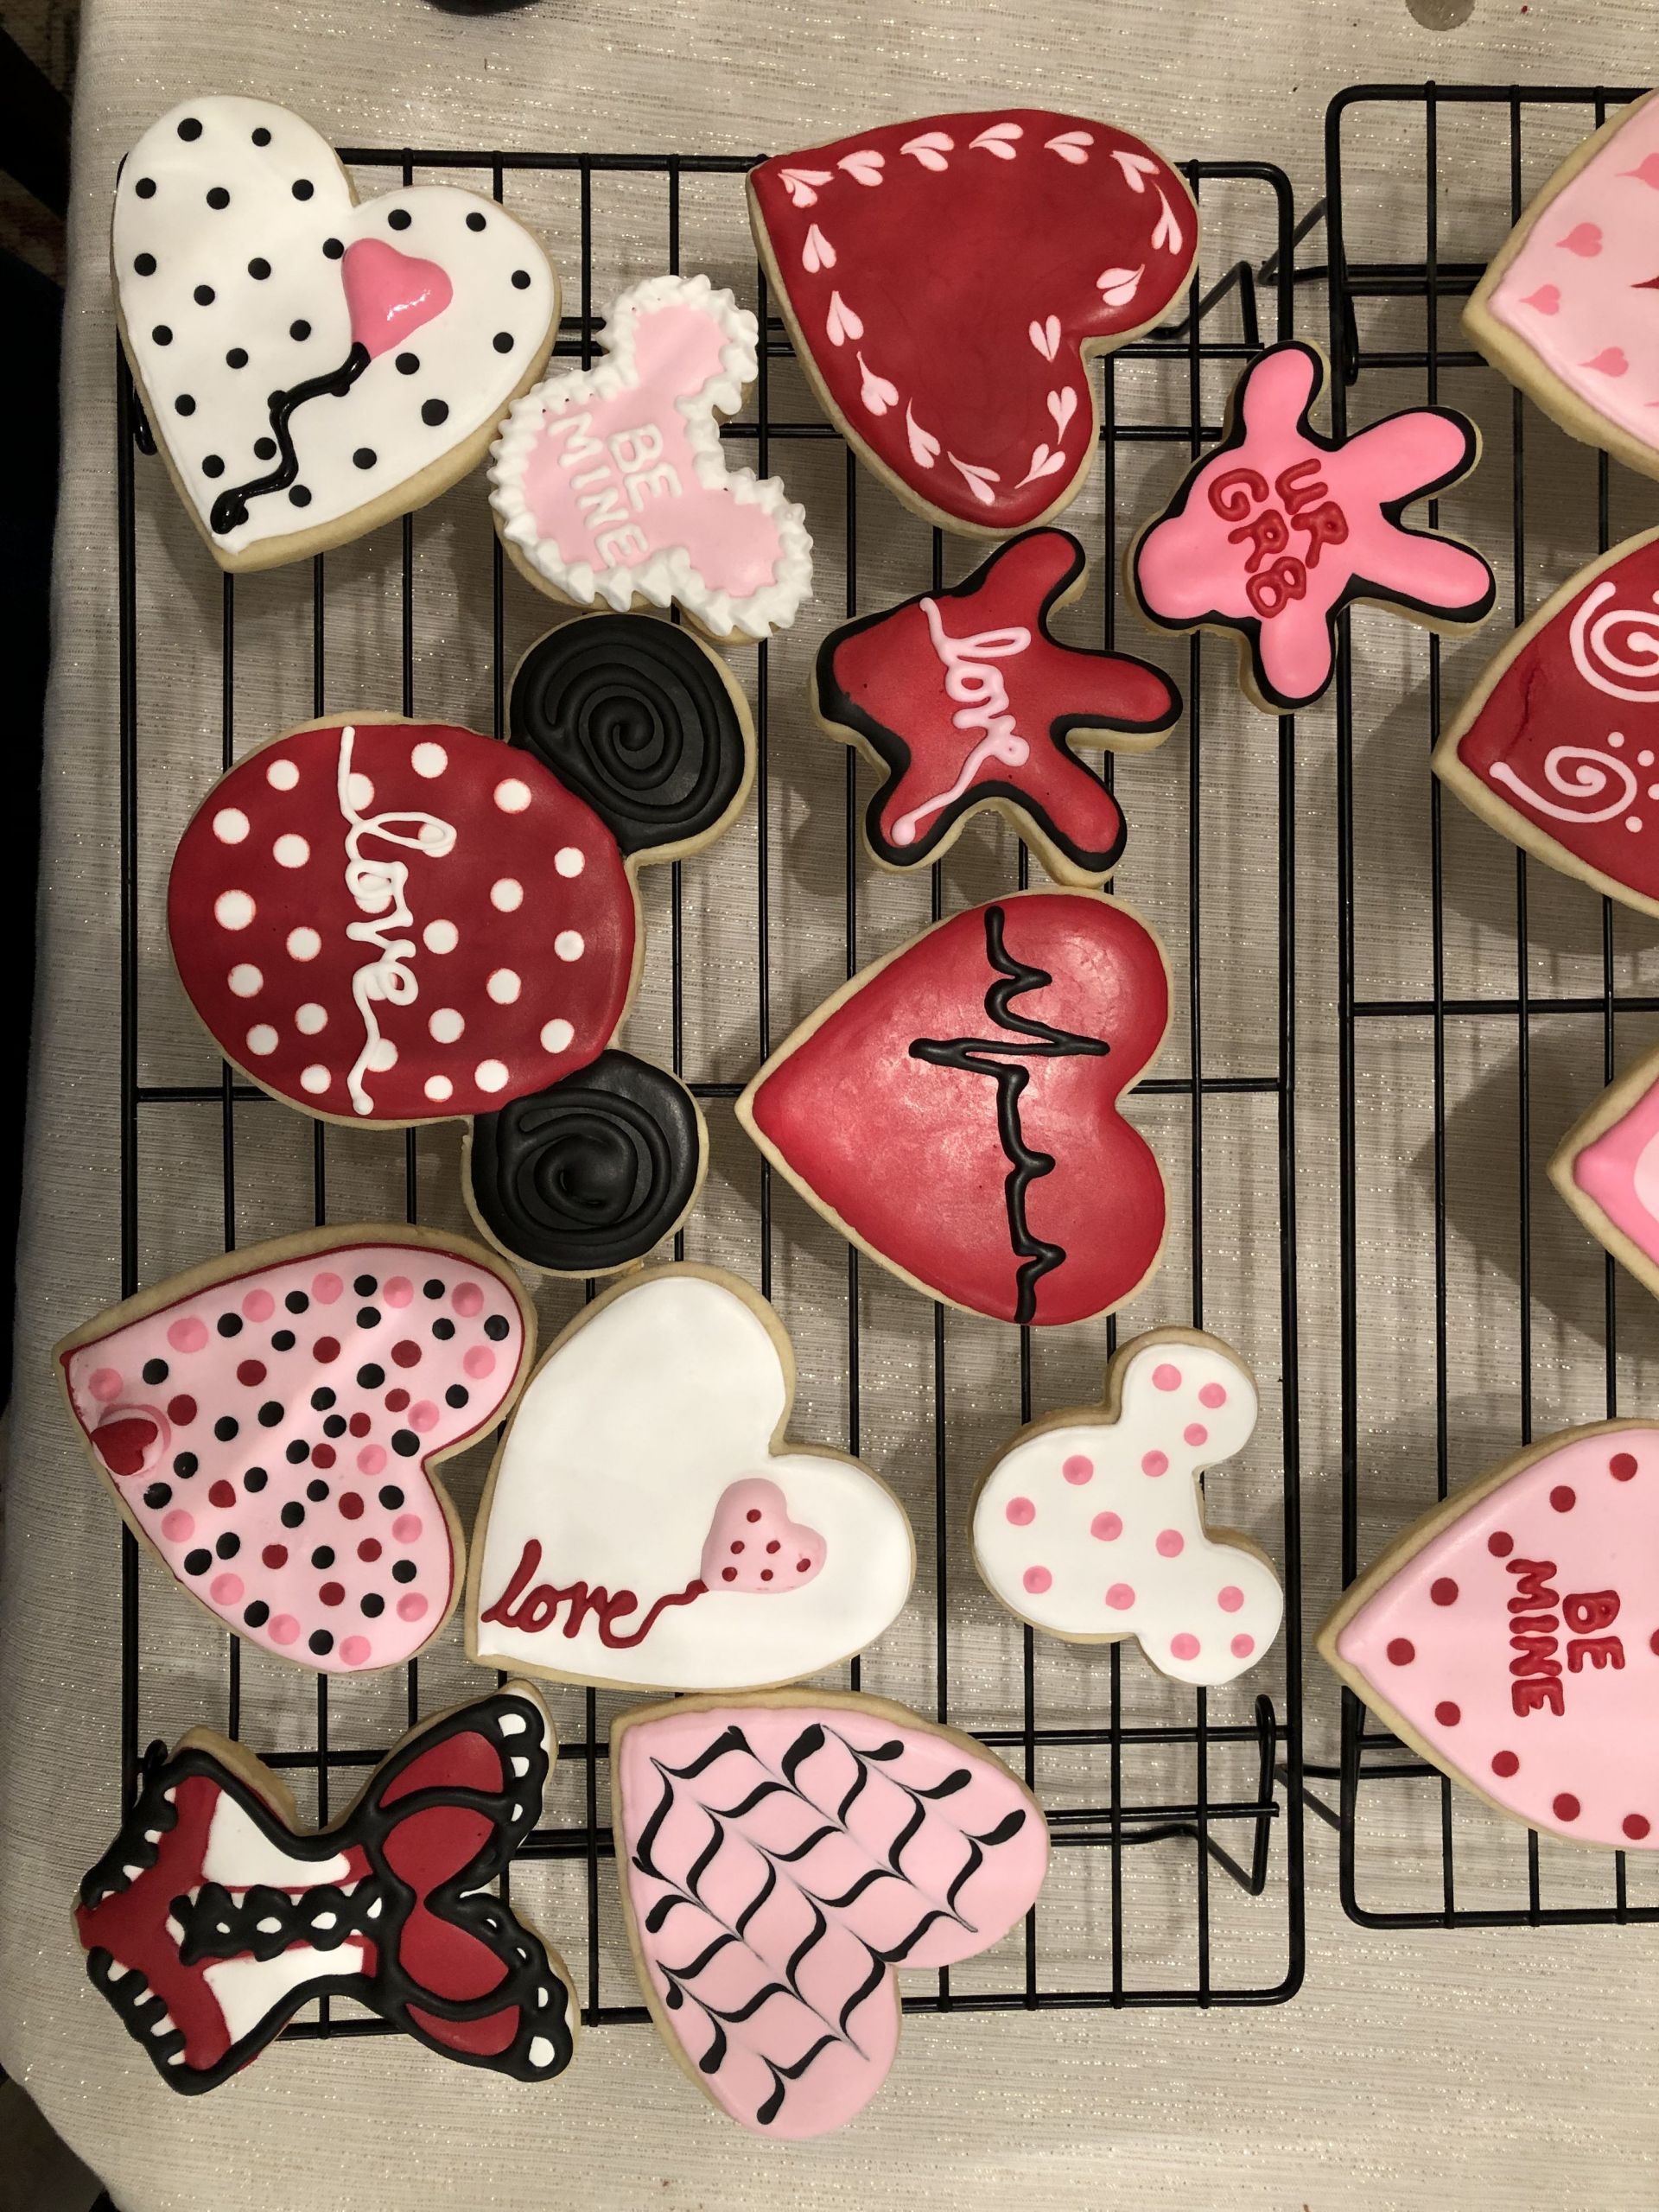 Valentine Sugar Cookies Decorating Ideas
 Pin by Hope on Cookie ideas